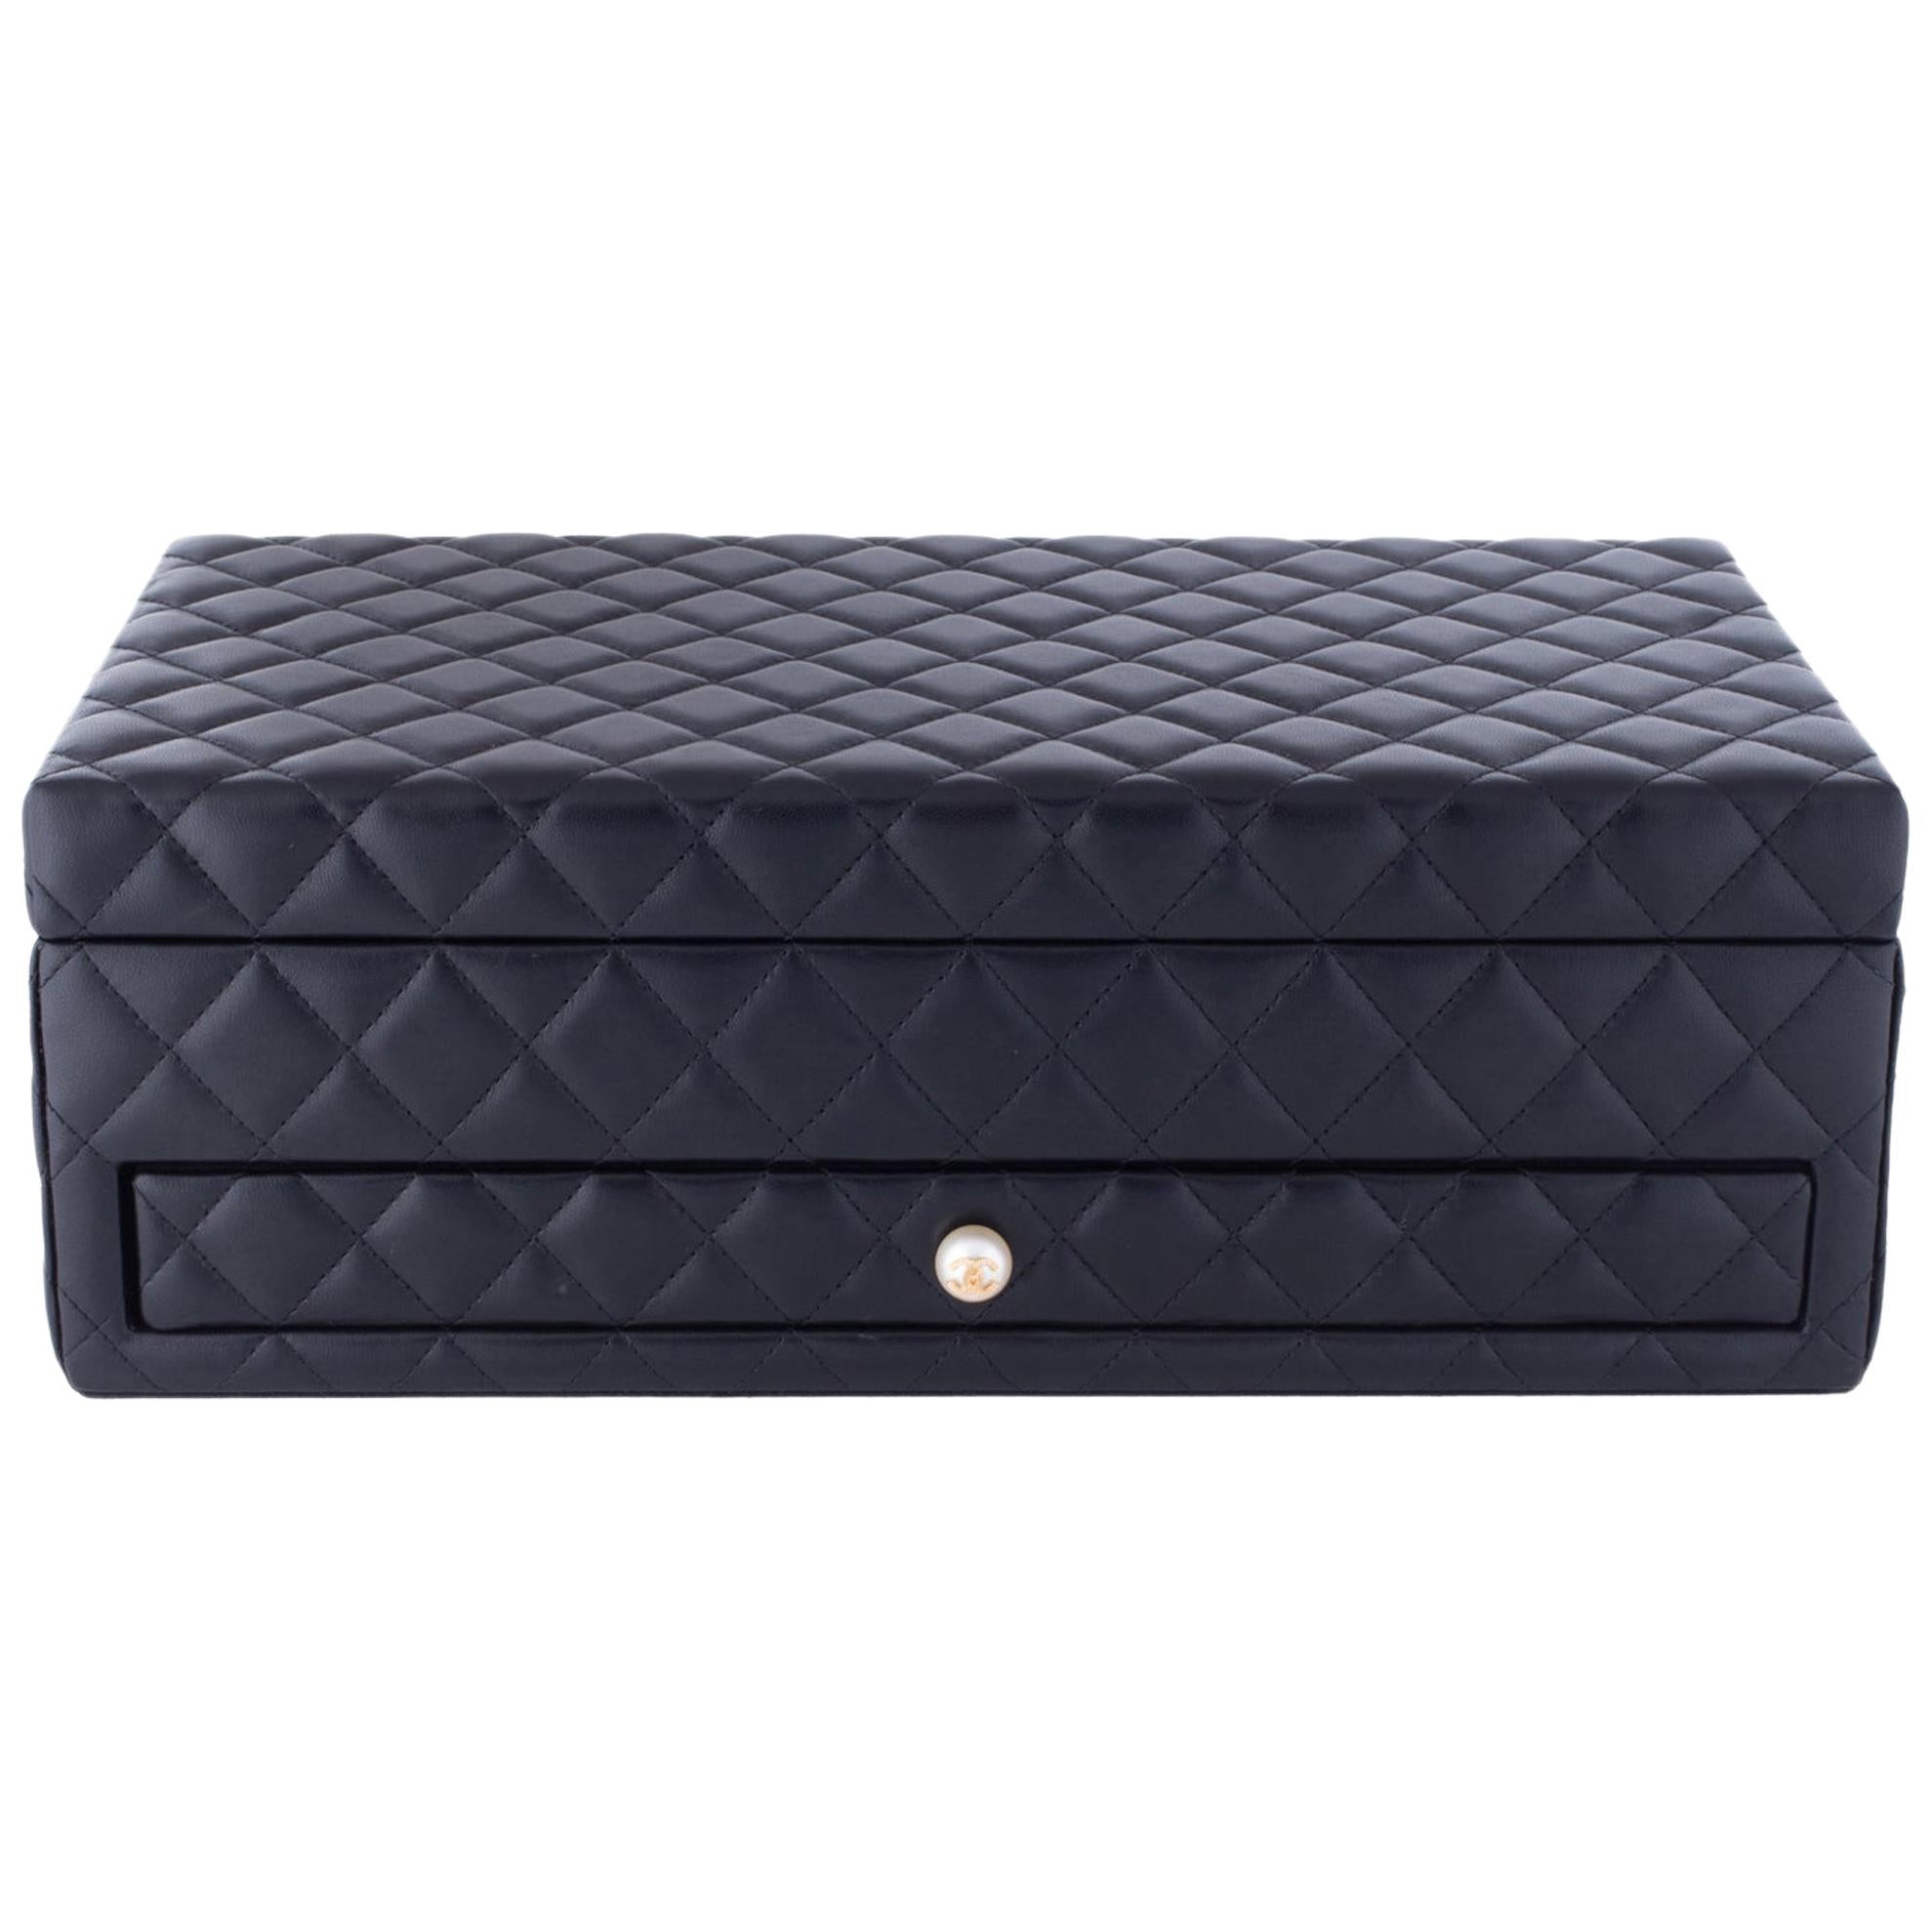 Chanel Black Leather Gold Pearl Women's Jewelry Drawer Vanity Storage Case Box